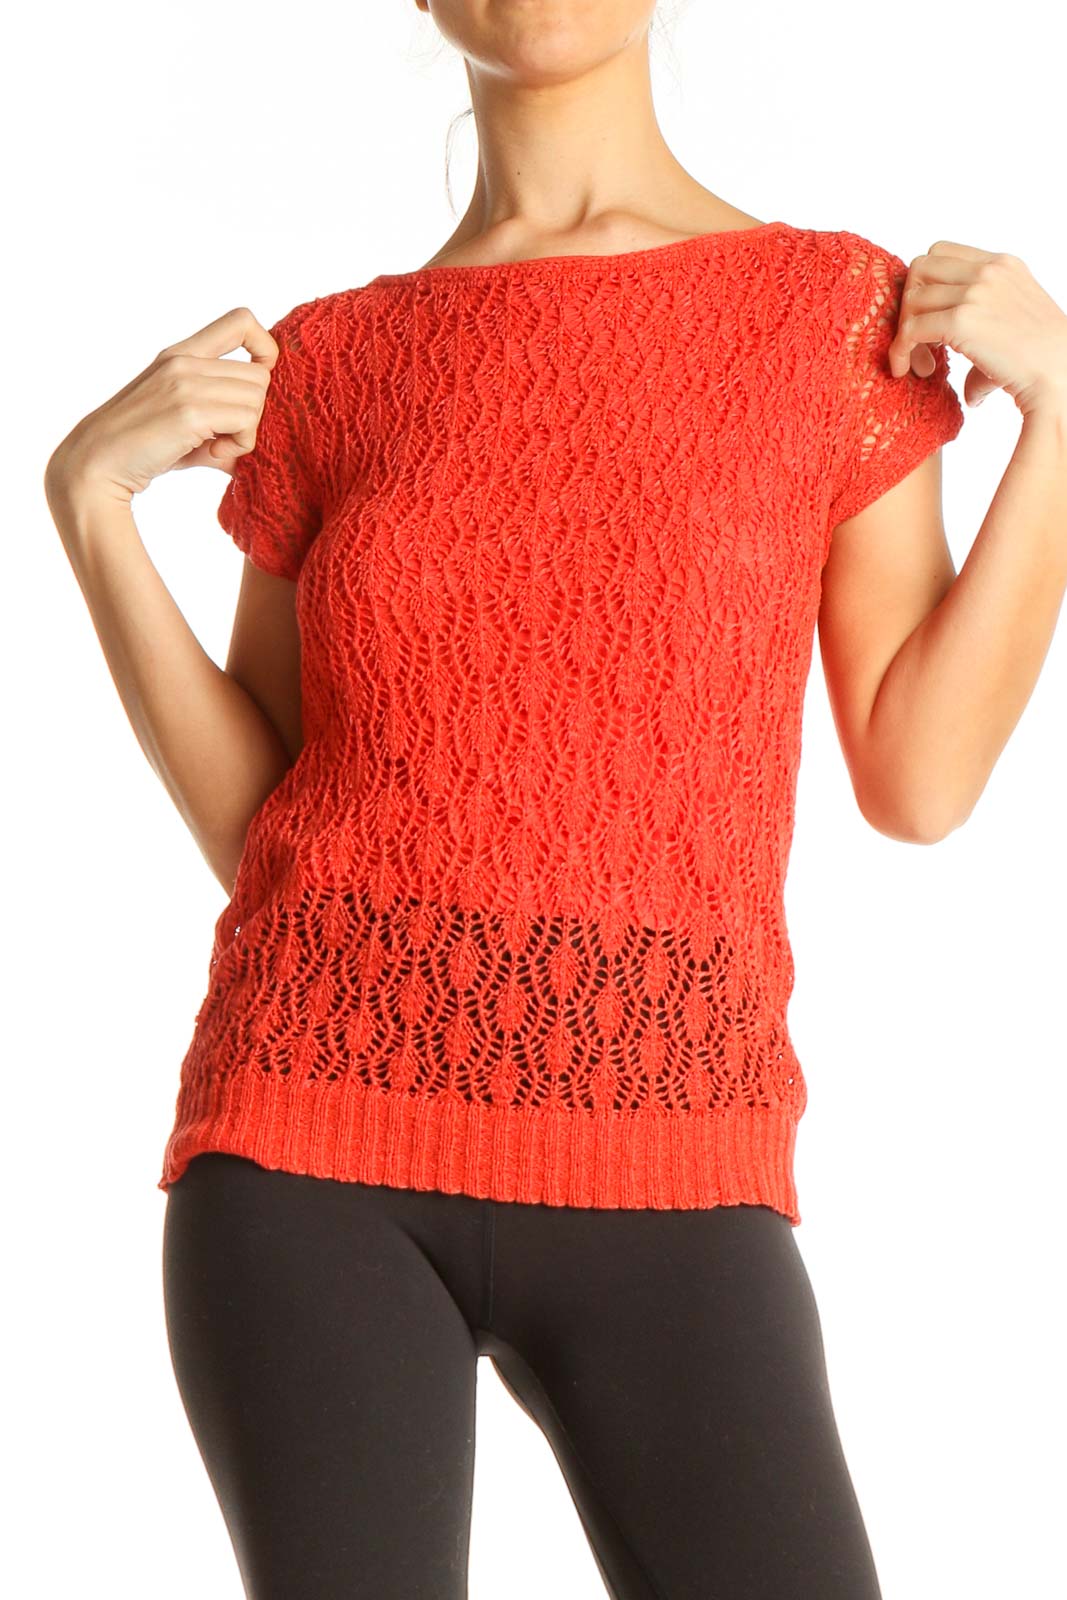 Orange Lace All Day Wear Sweater Front